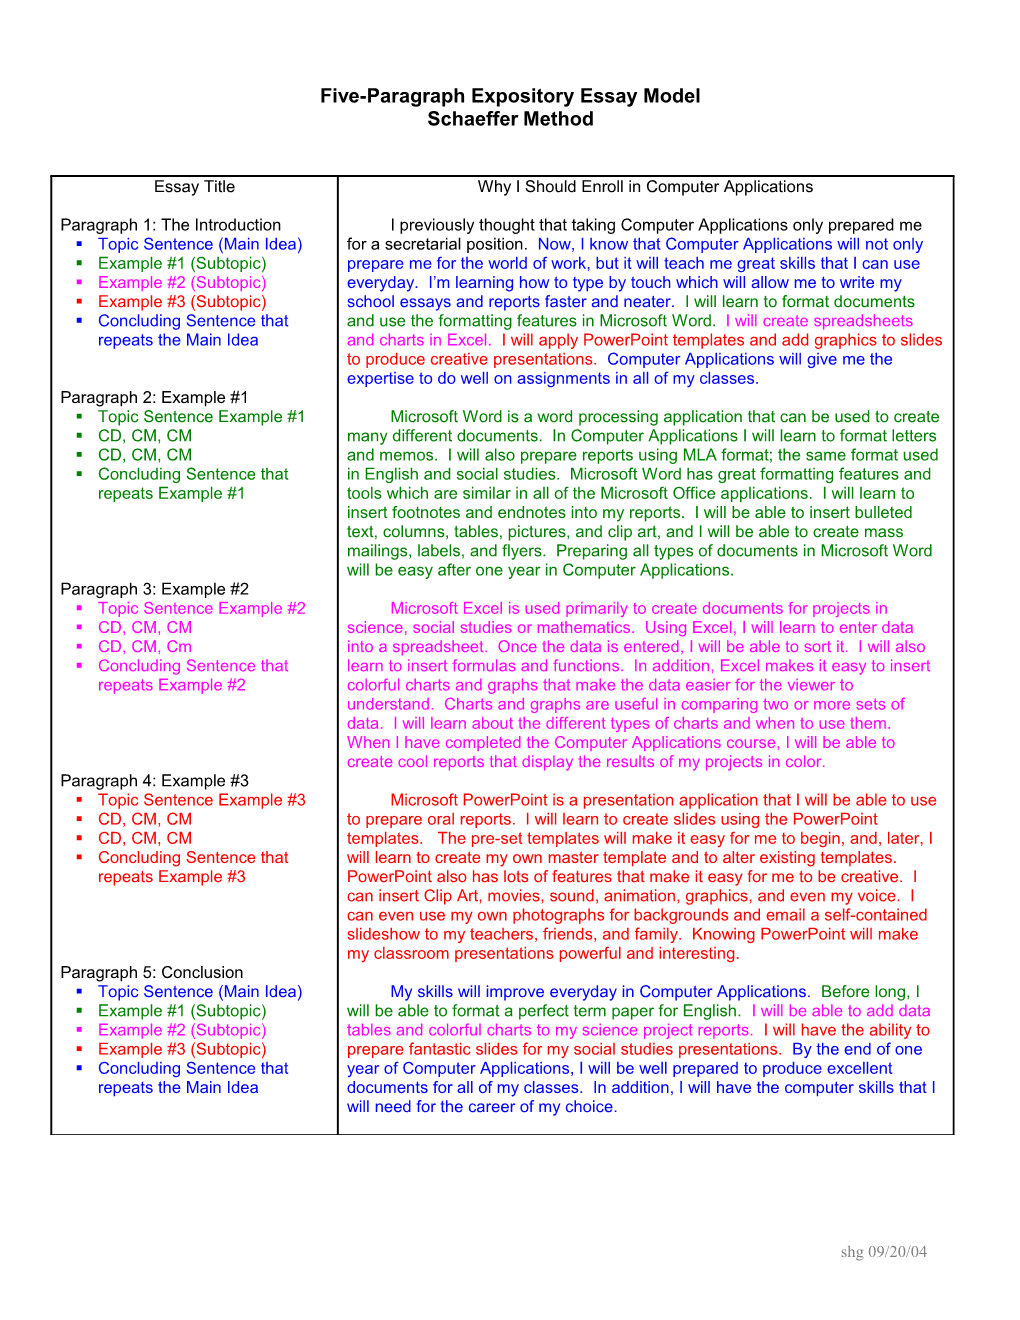 Five-Paragraph Expository Essay Model